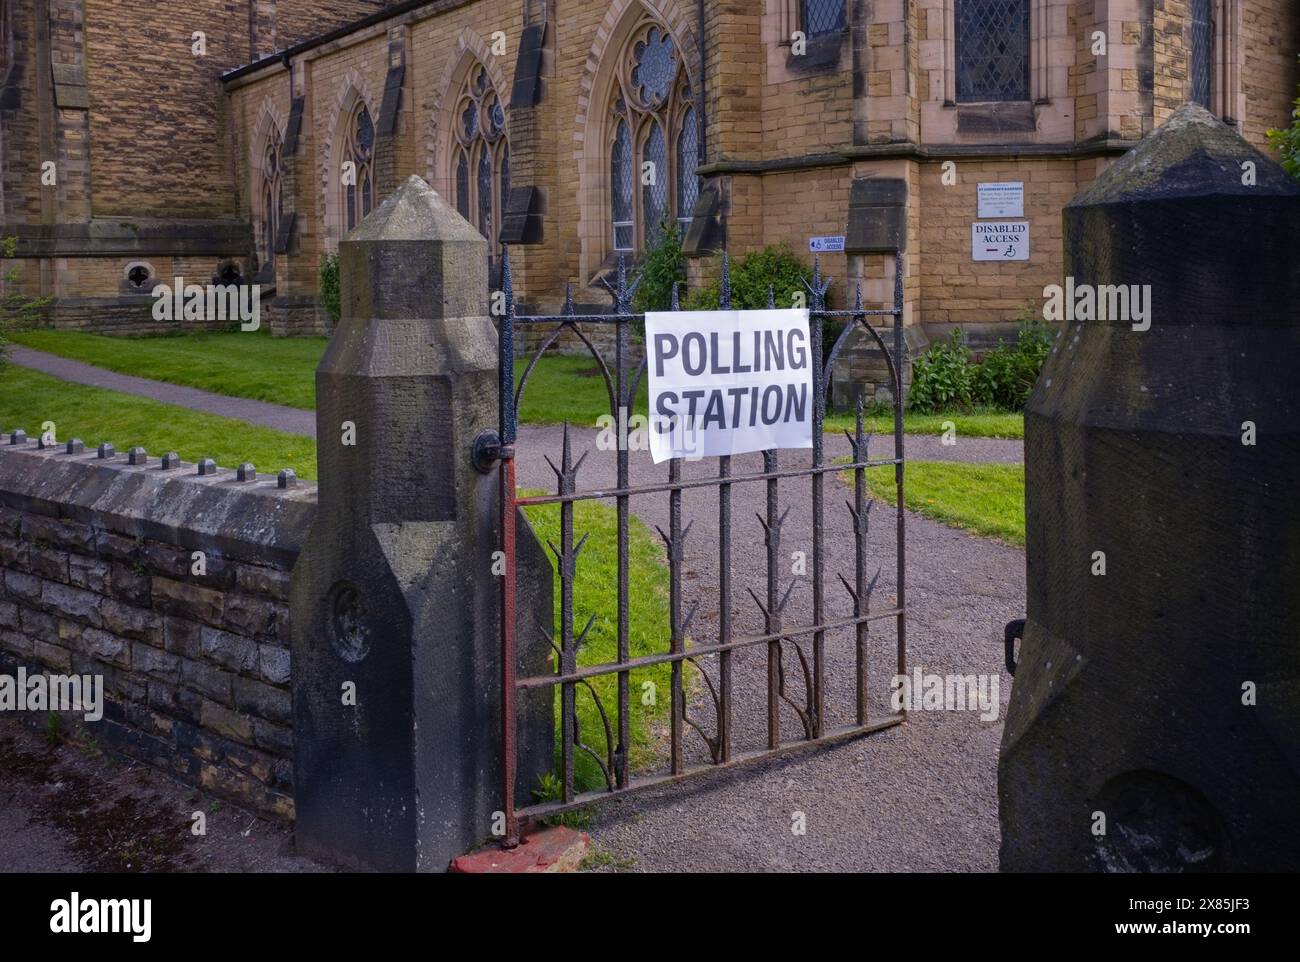 Polling station signage at St Andrews Church in Scarborough Stock Photo